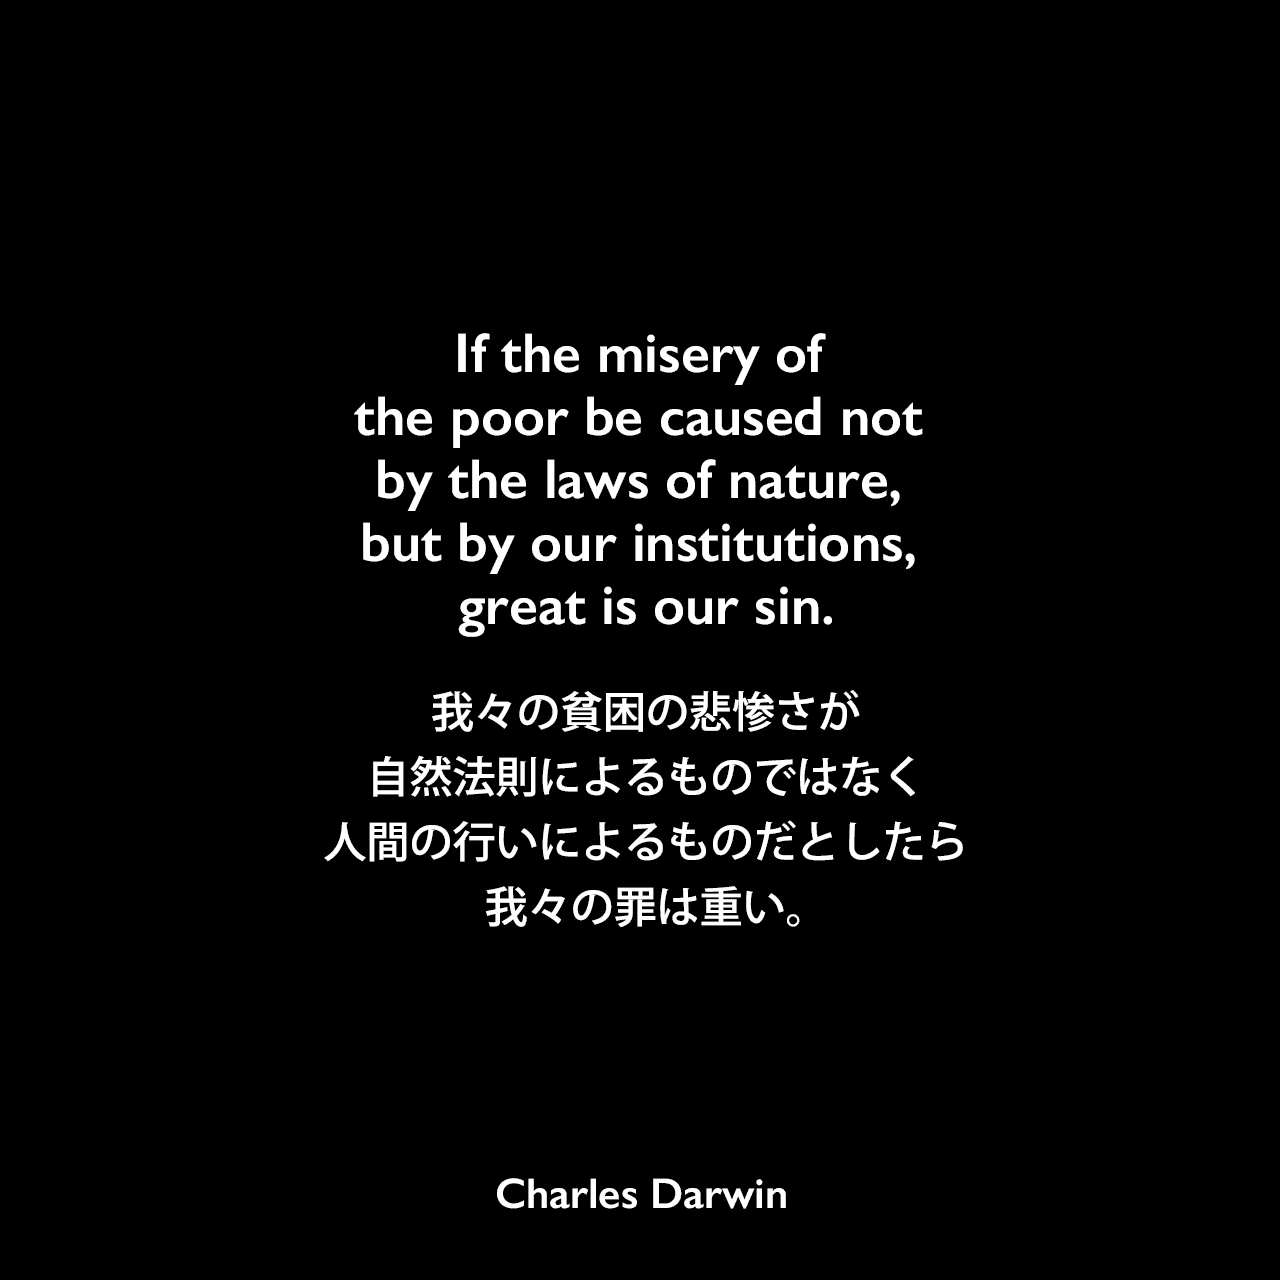 If the misery of the poor be caused not by the laws of nature, but by our institutions, great is our sin.我々の貧困の悲惨さが自然法則によるものではなく、人間の行いによるものだとしたら、我々の罪は重い。Charles Darwin